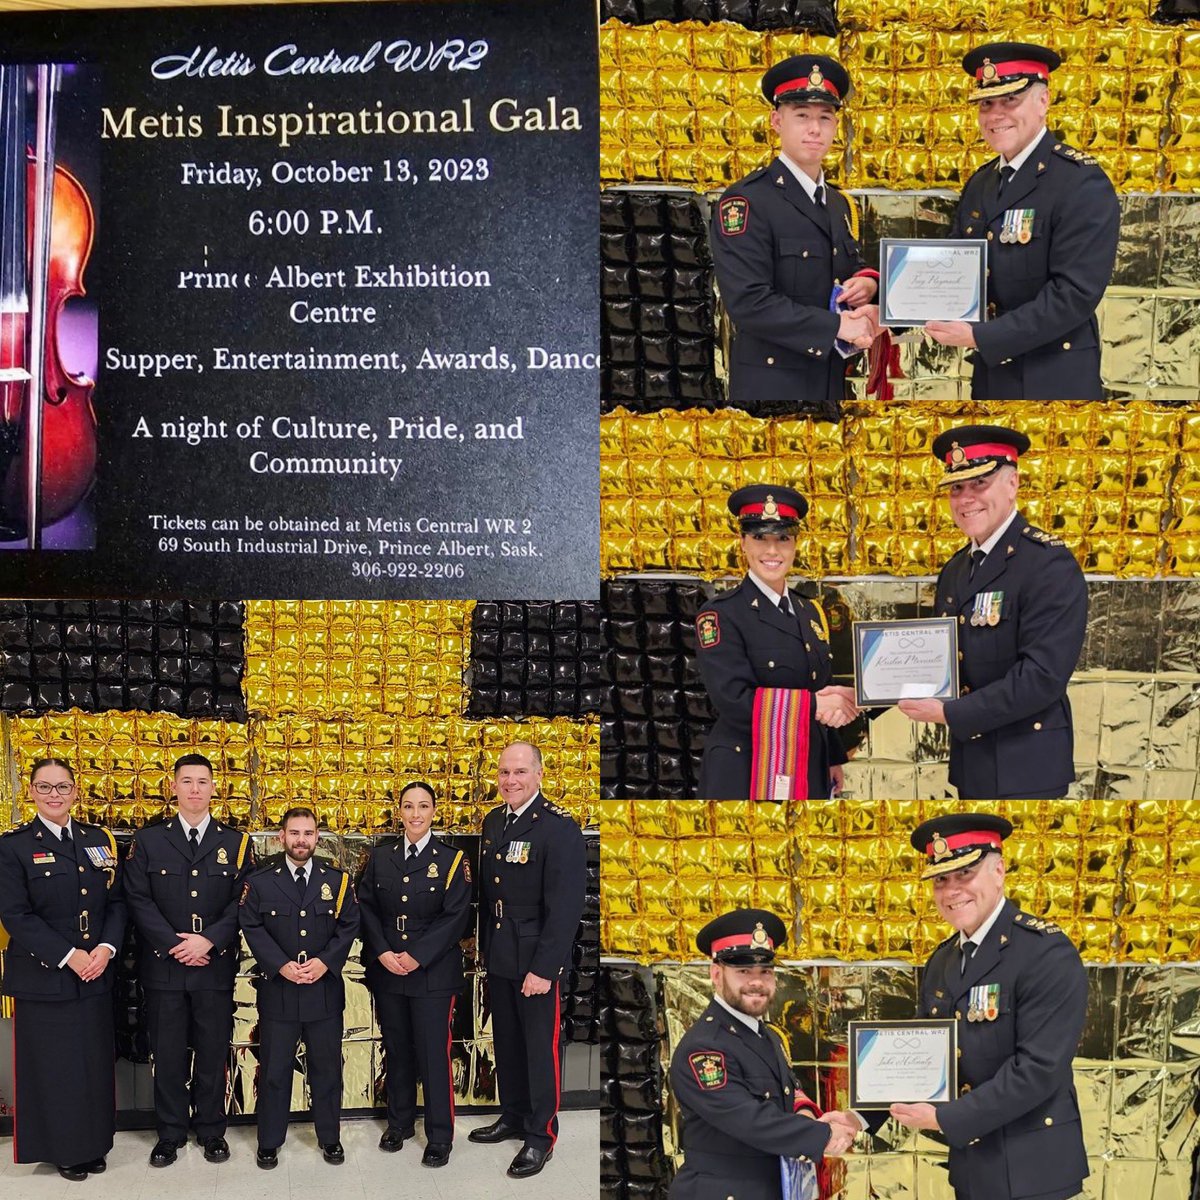 An exceptional night of recognition for three dedicated Prince Albert Police officers with proud Metis roots. Serving the community while inspiring a young generation for the future of our Service. Job well done..